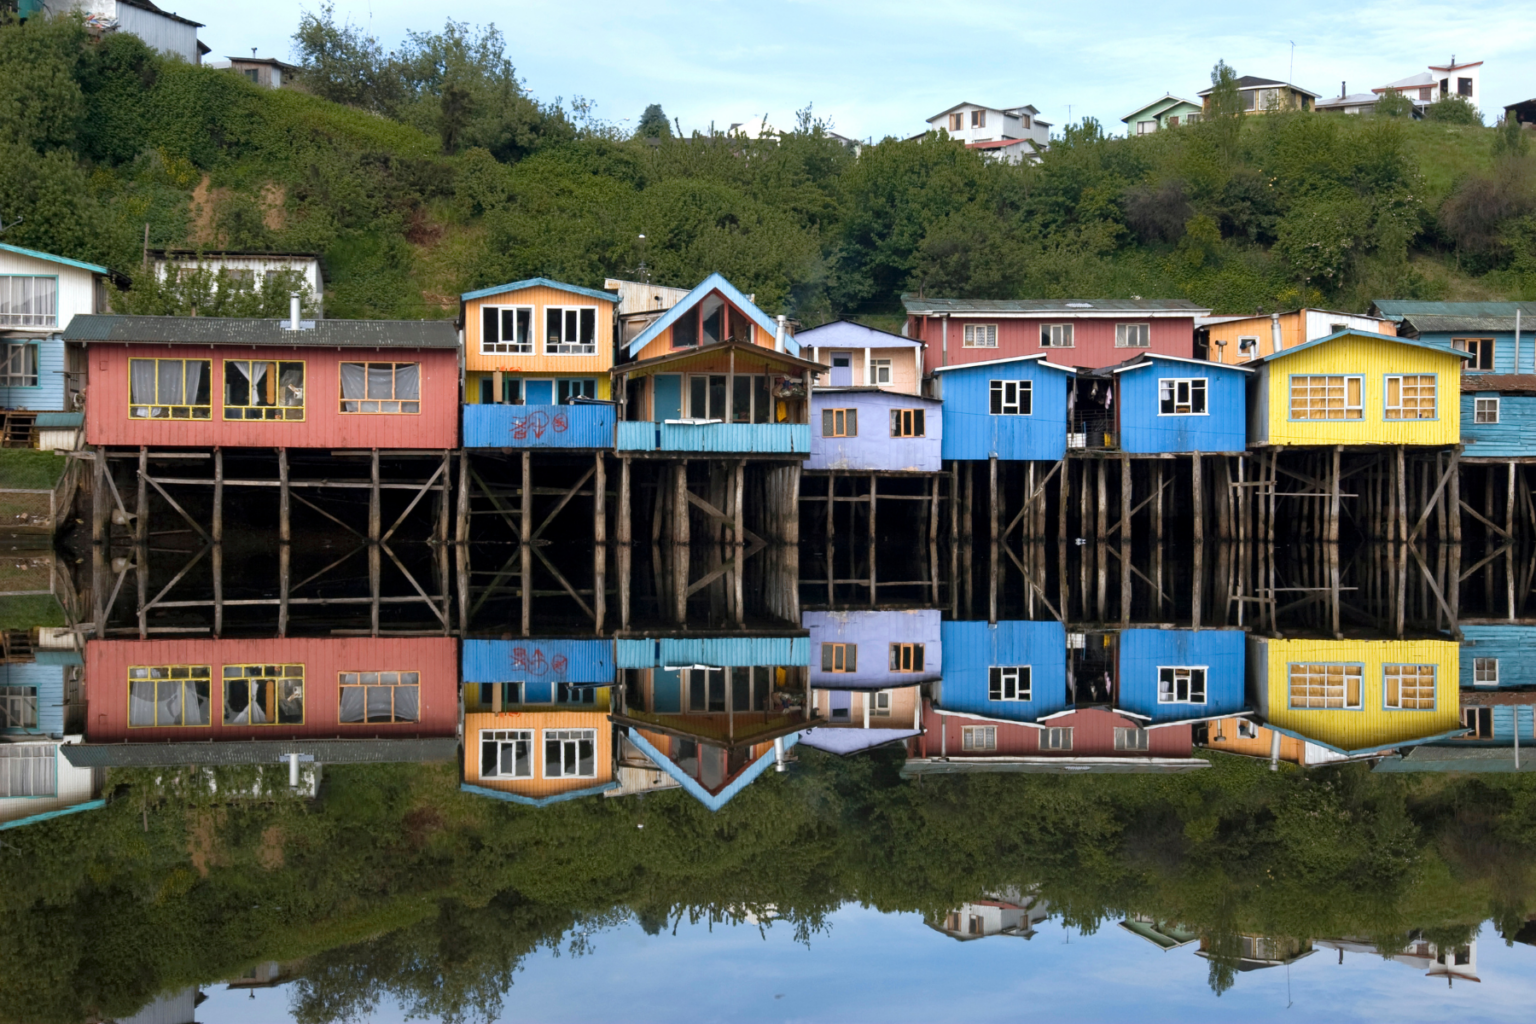 Colorful houses on stilts over the water